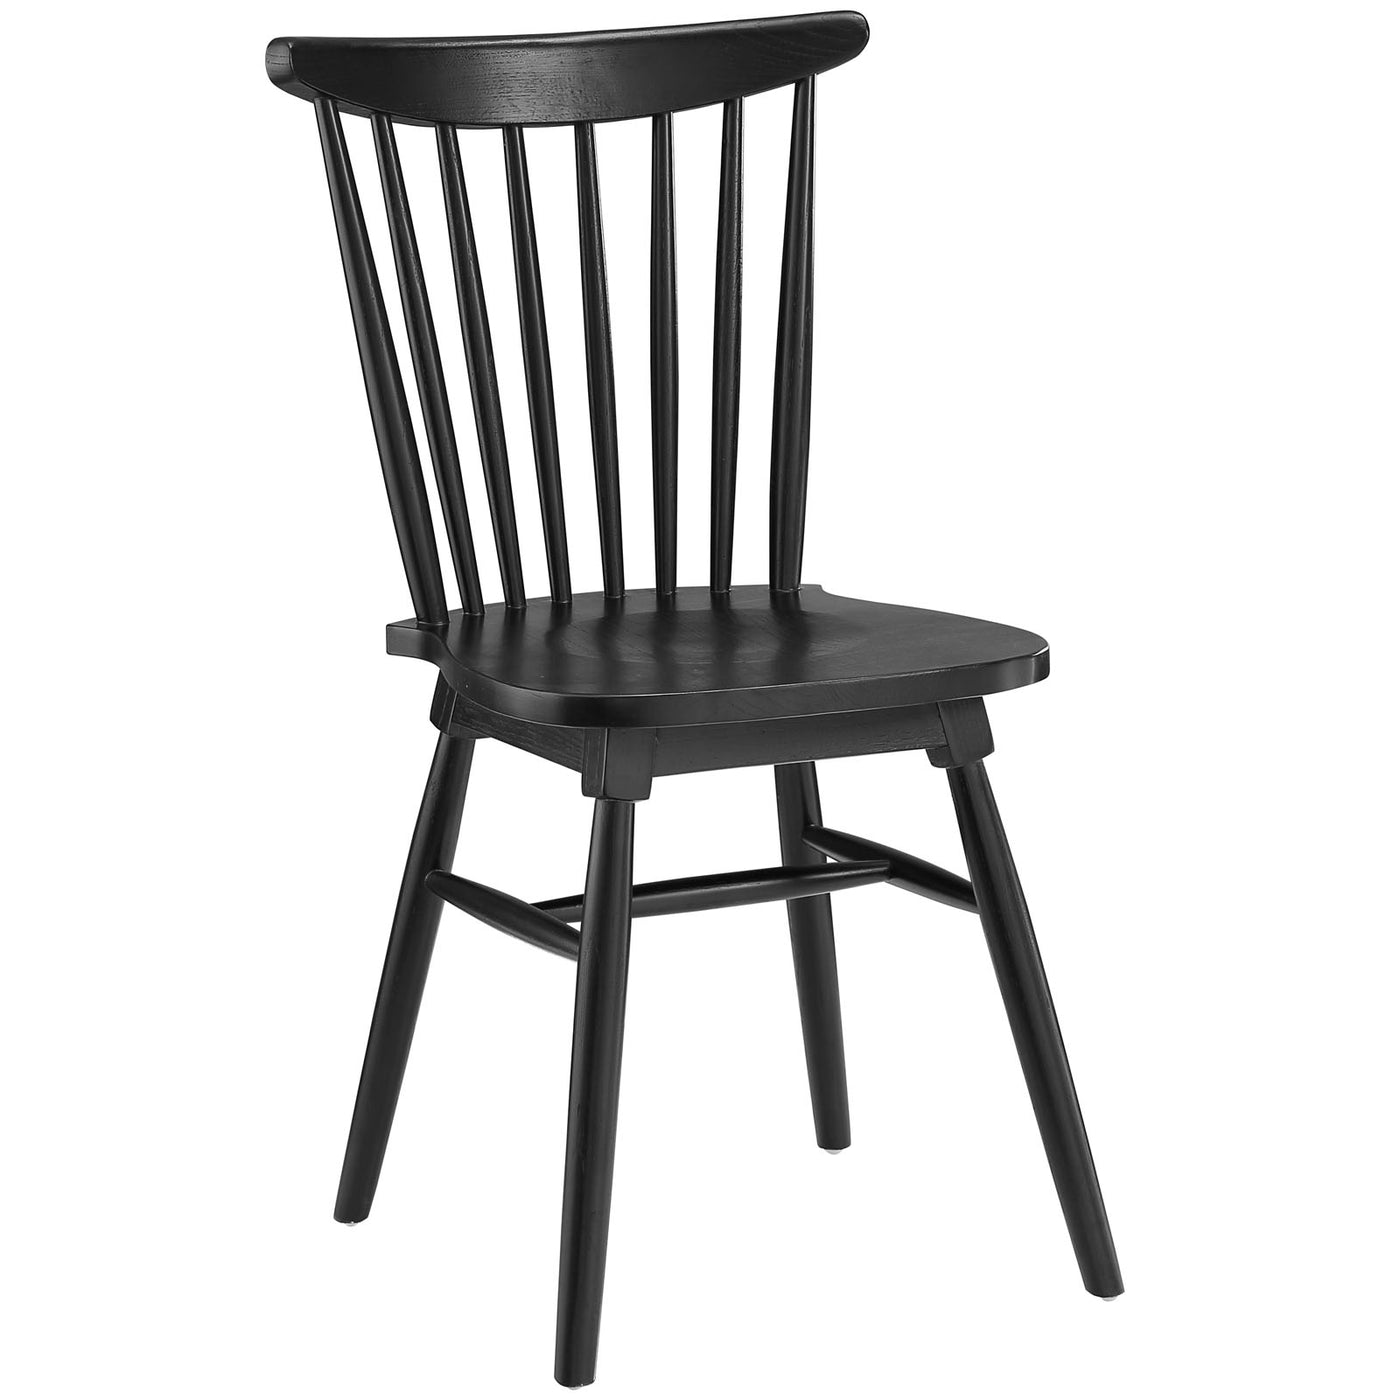 Amble Dining Side Chair